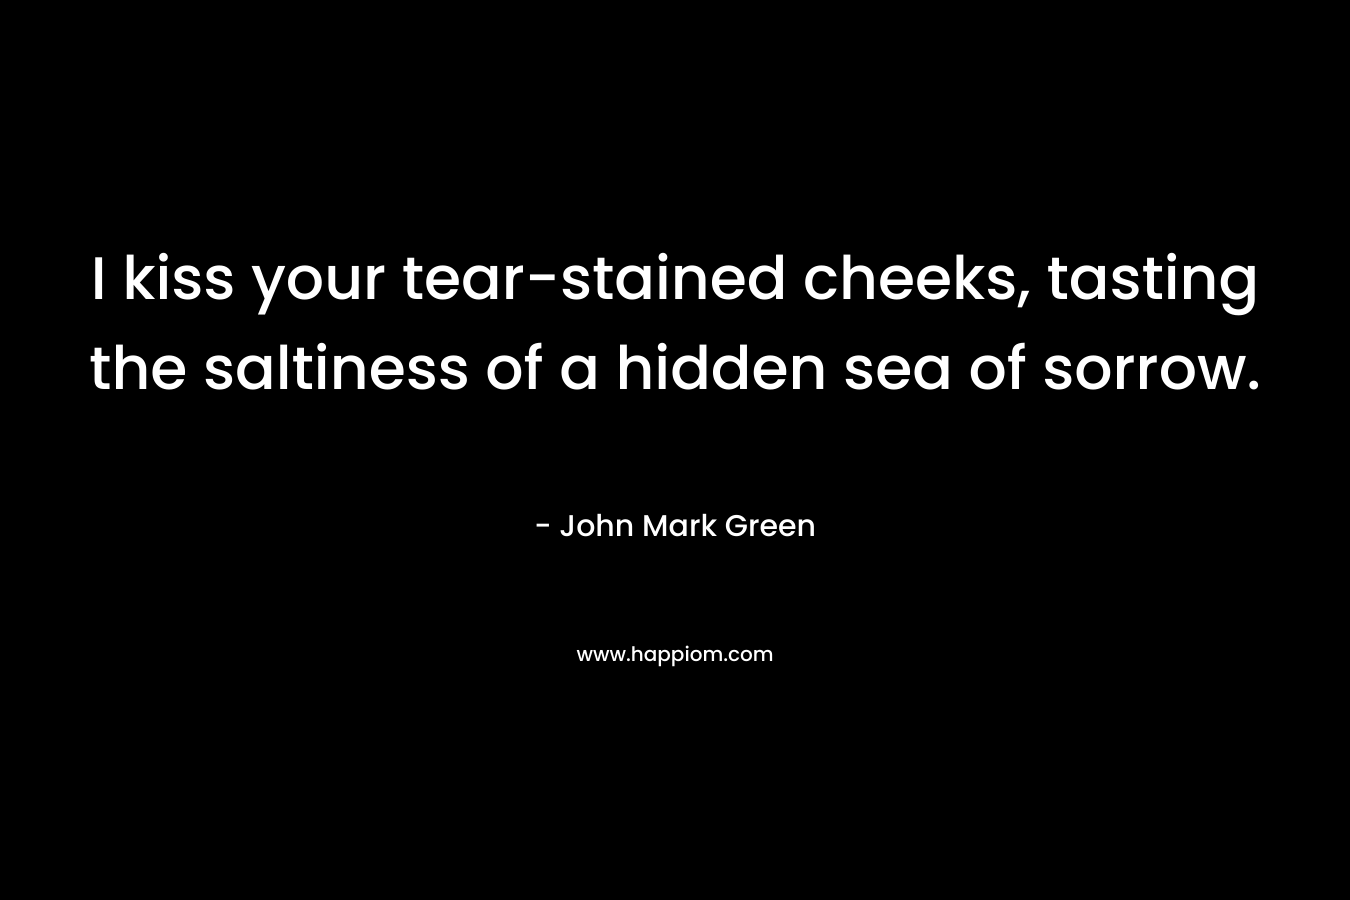 I kiss your tear-stained cheeks, tasting the saltiness of a hidden sea of sorrow. – John Mark Green